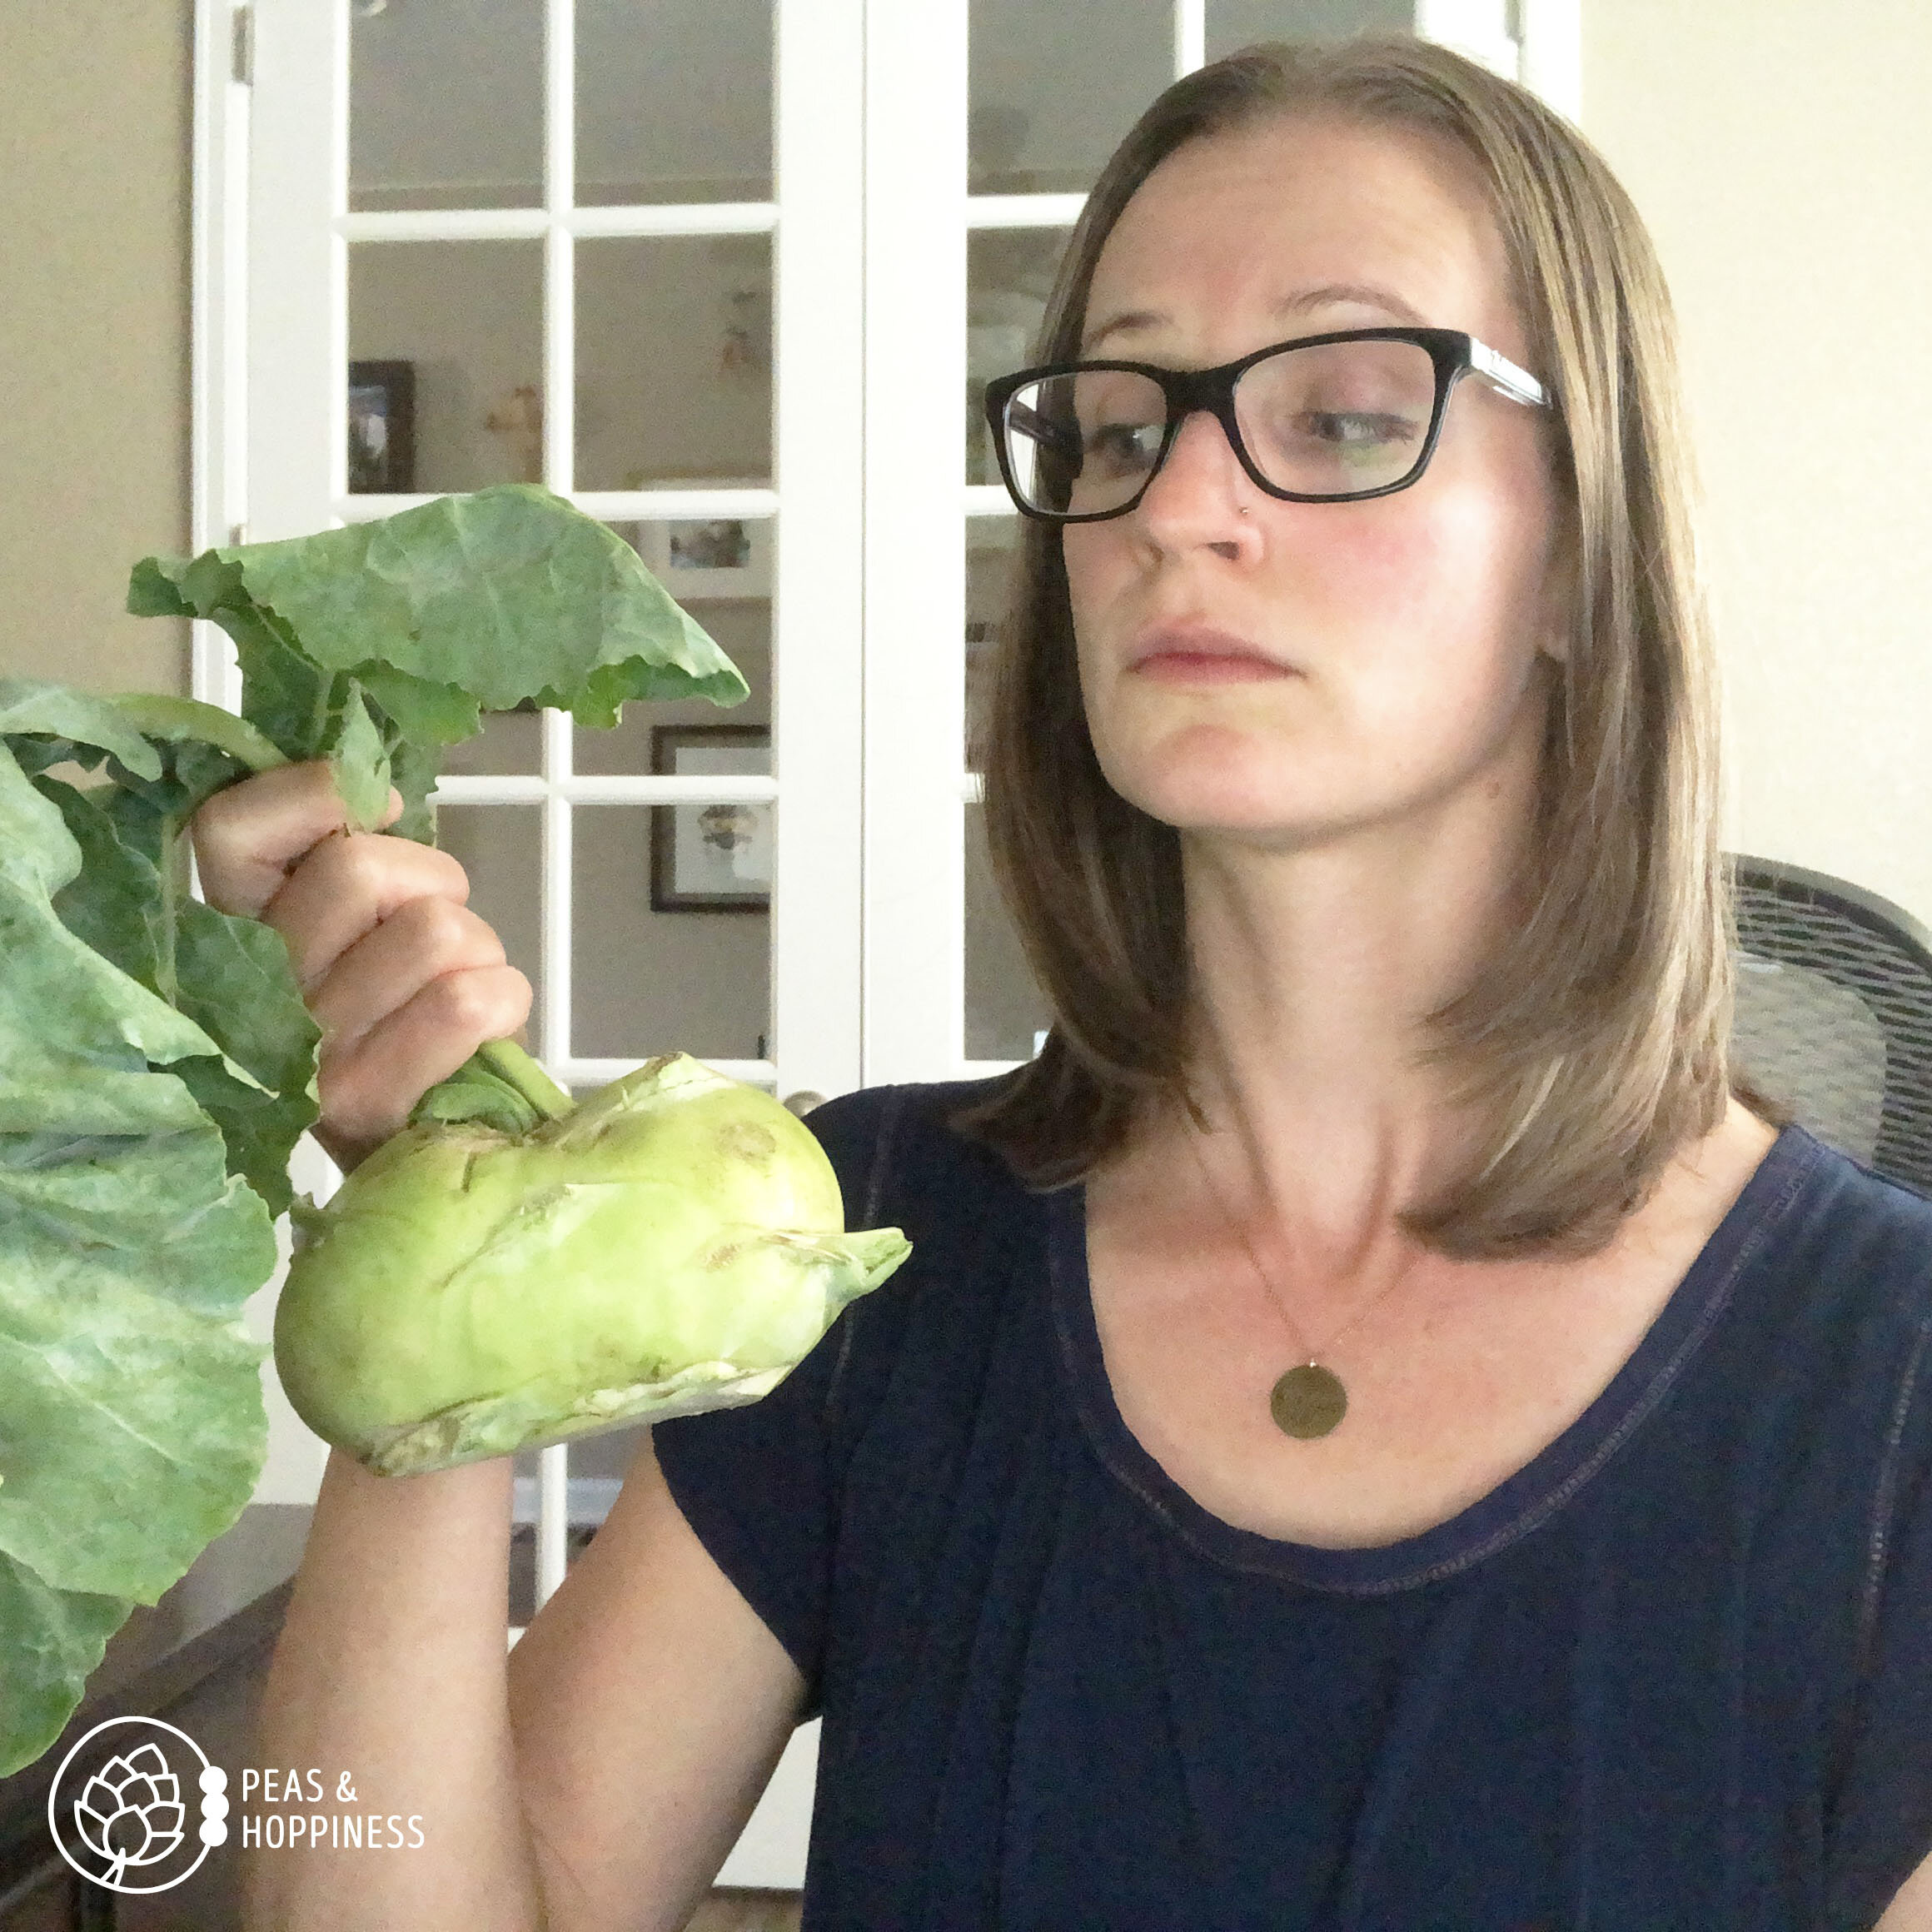 I was introduced to Kohlrabi when I moved to Colorado and found it at a local farmer’s market. Here how to prep and enjoy this veggie!